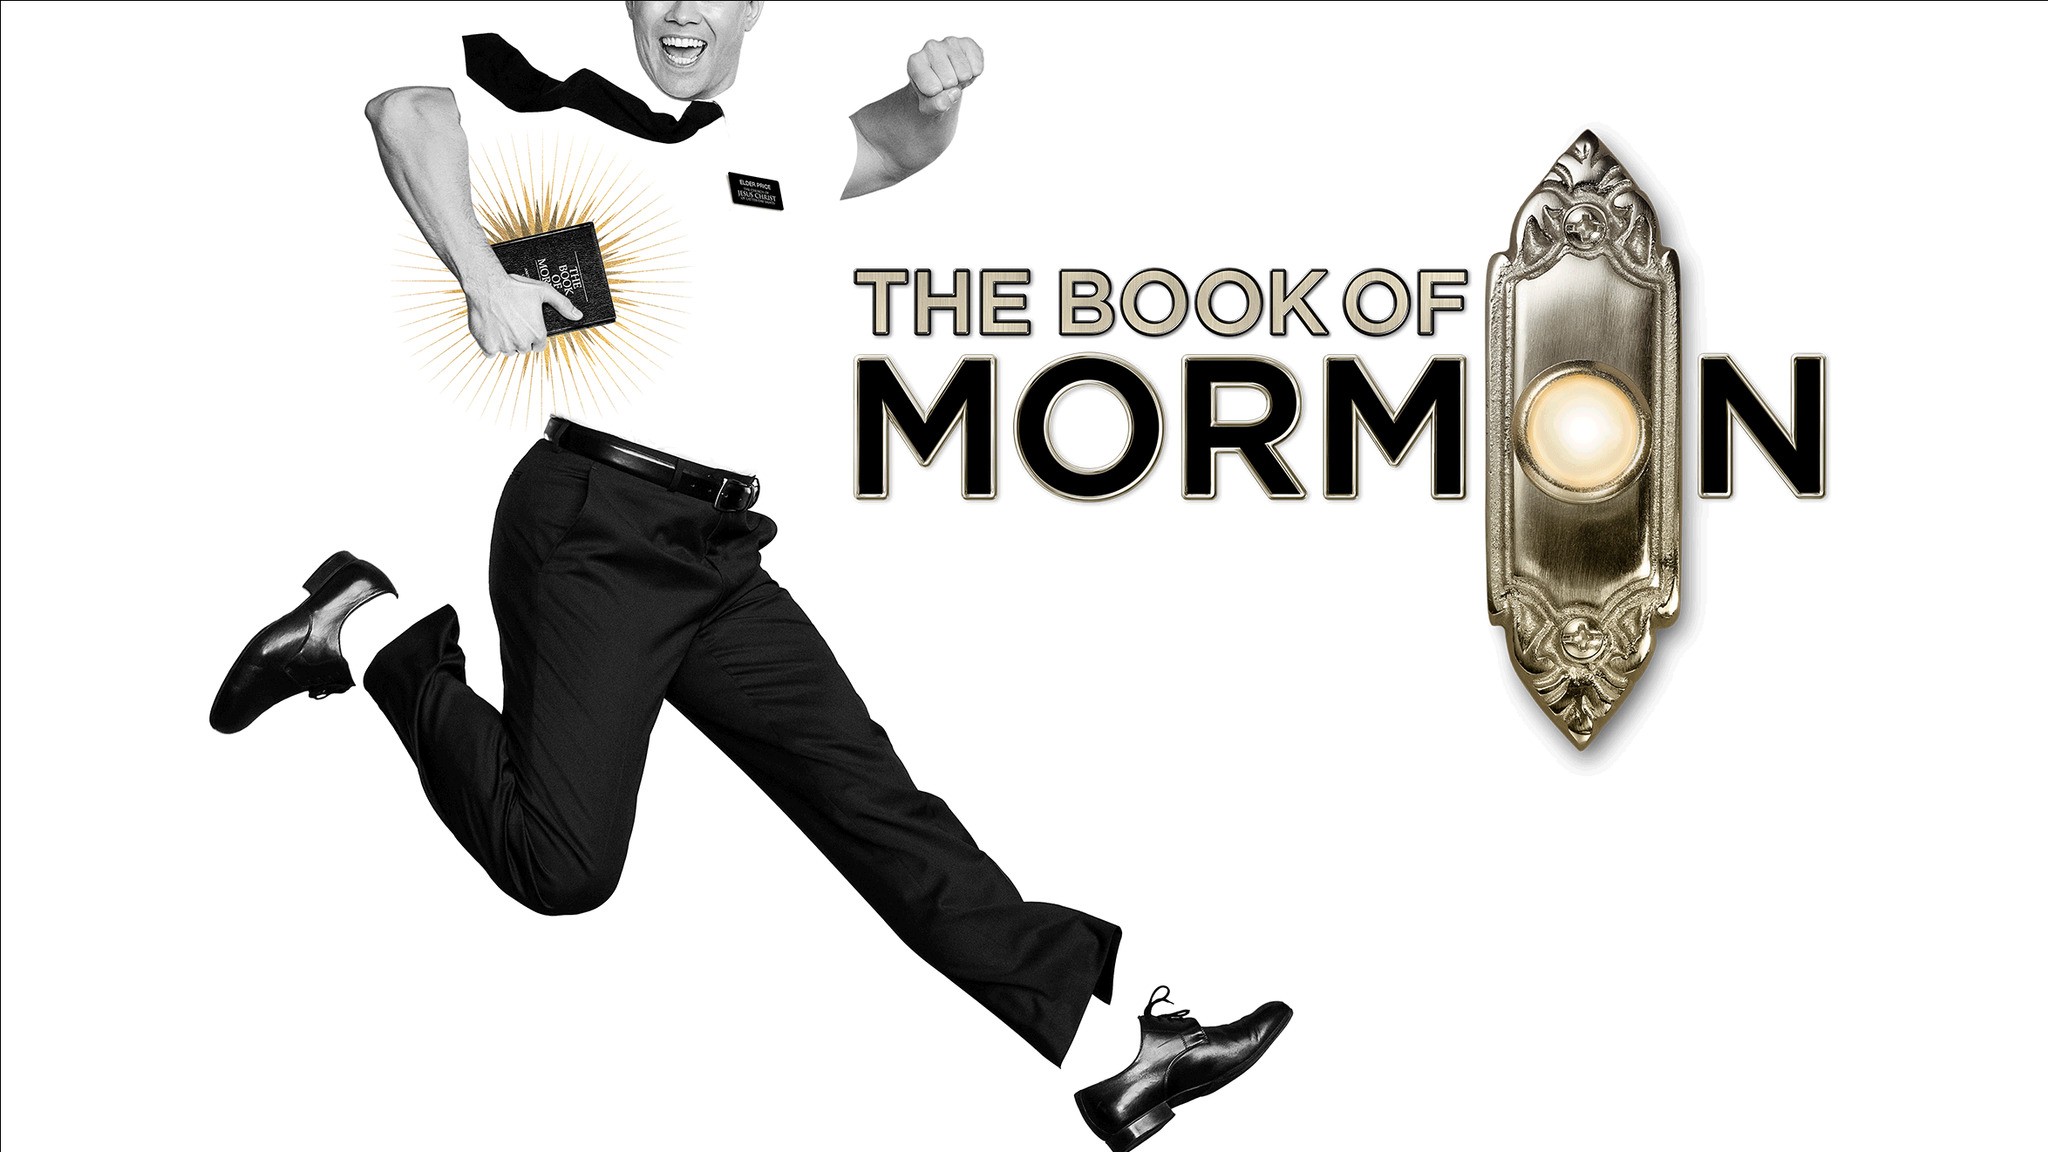 GRAPHIC: "The Book of Mormon" performances took place Jan. 15-20, 2019 at Houston's Hobby Center. Photo courtesy of "The Book of Mormon" on Tour